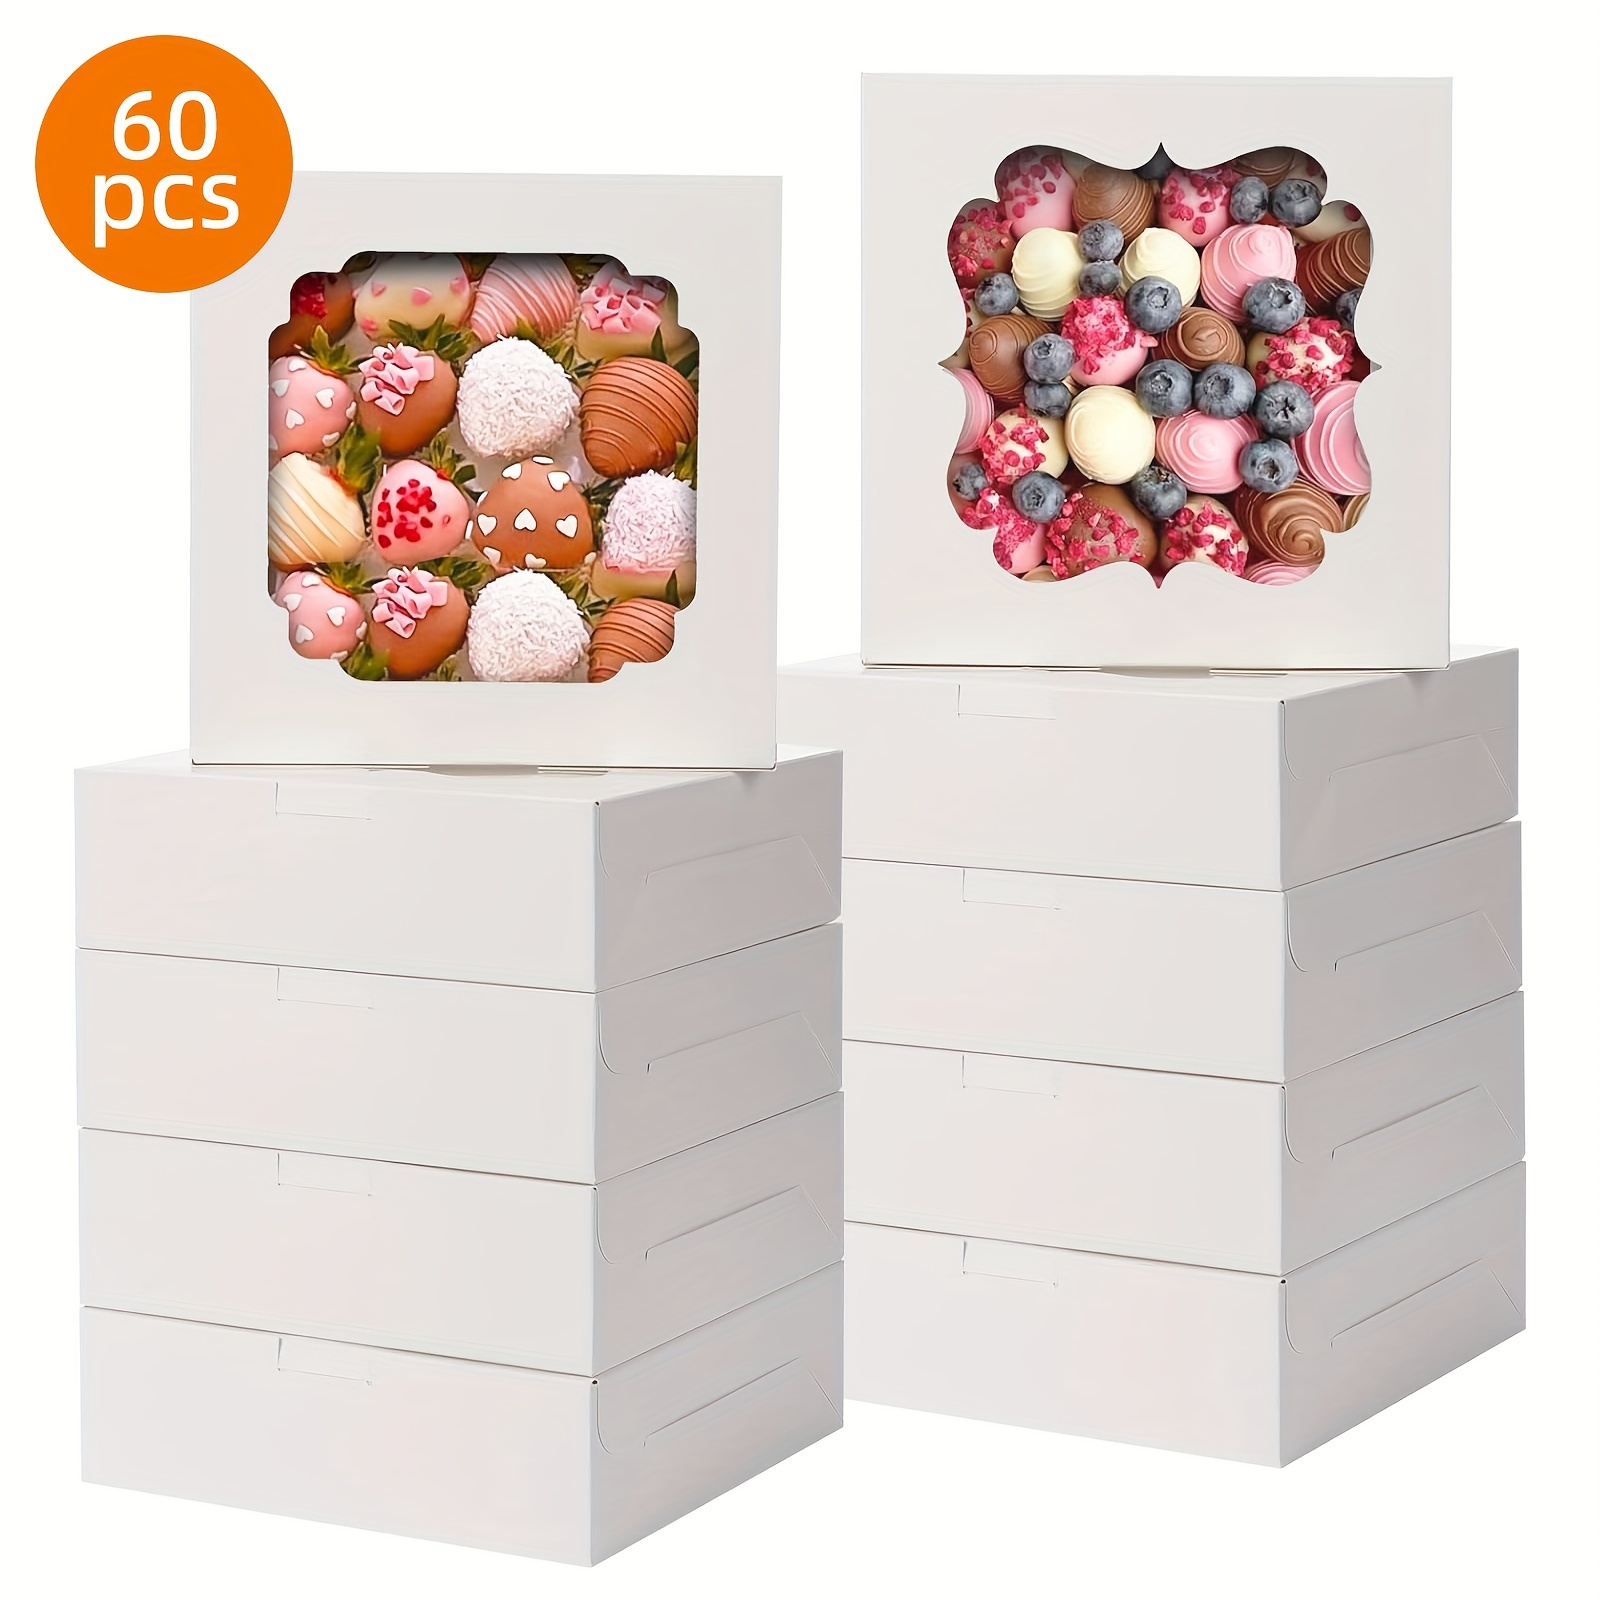 

60pcs White Cookie Boxes, Biscuit Boxes, Candy Boxes, Bakery Boxes, 8x8x2.5 Inches Bakery Boxes With 2 Style Windows For Pastry, Dessert, Cake Chocolate Strawberries Pie